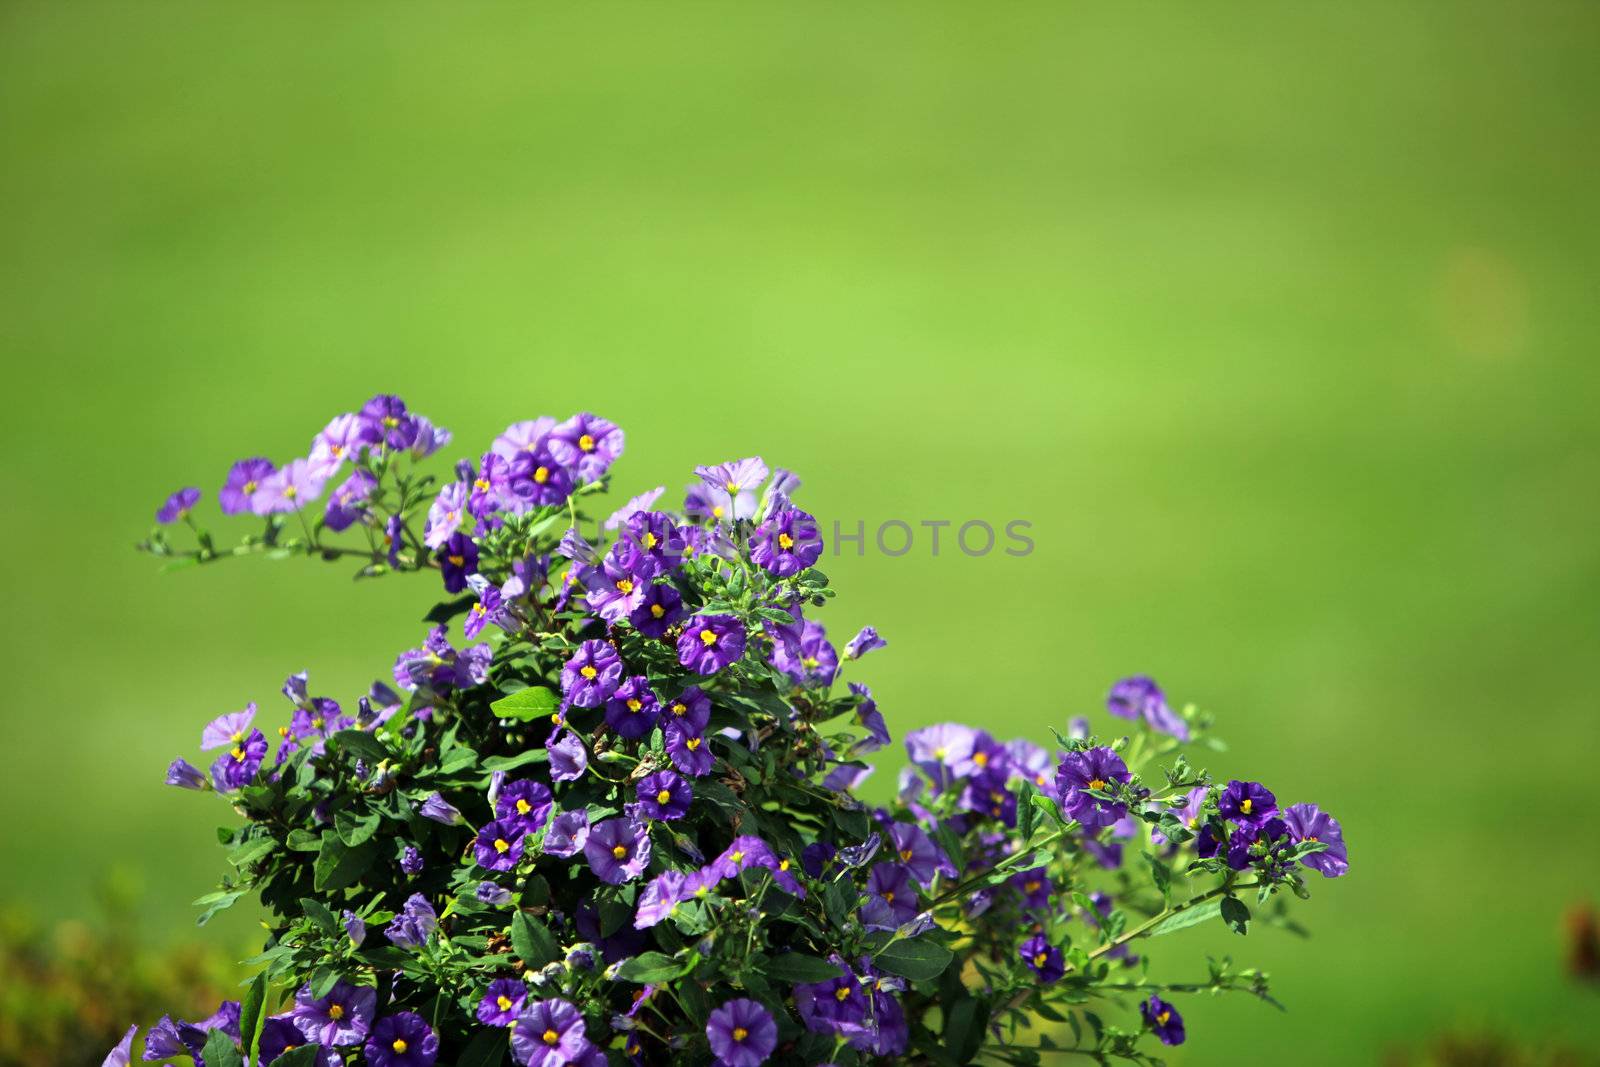 green background with lilac flower by Farina6000